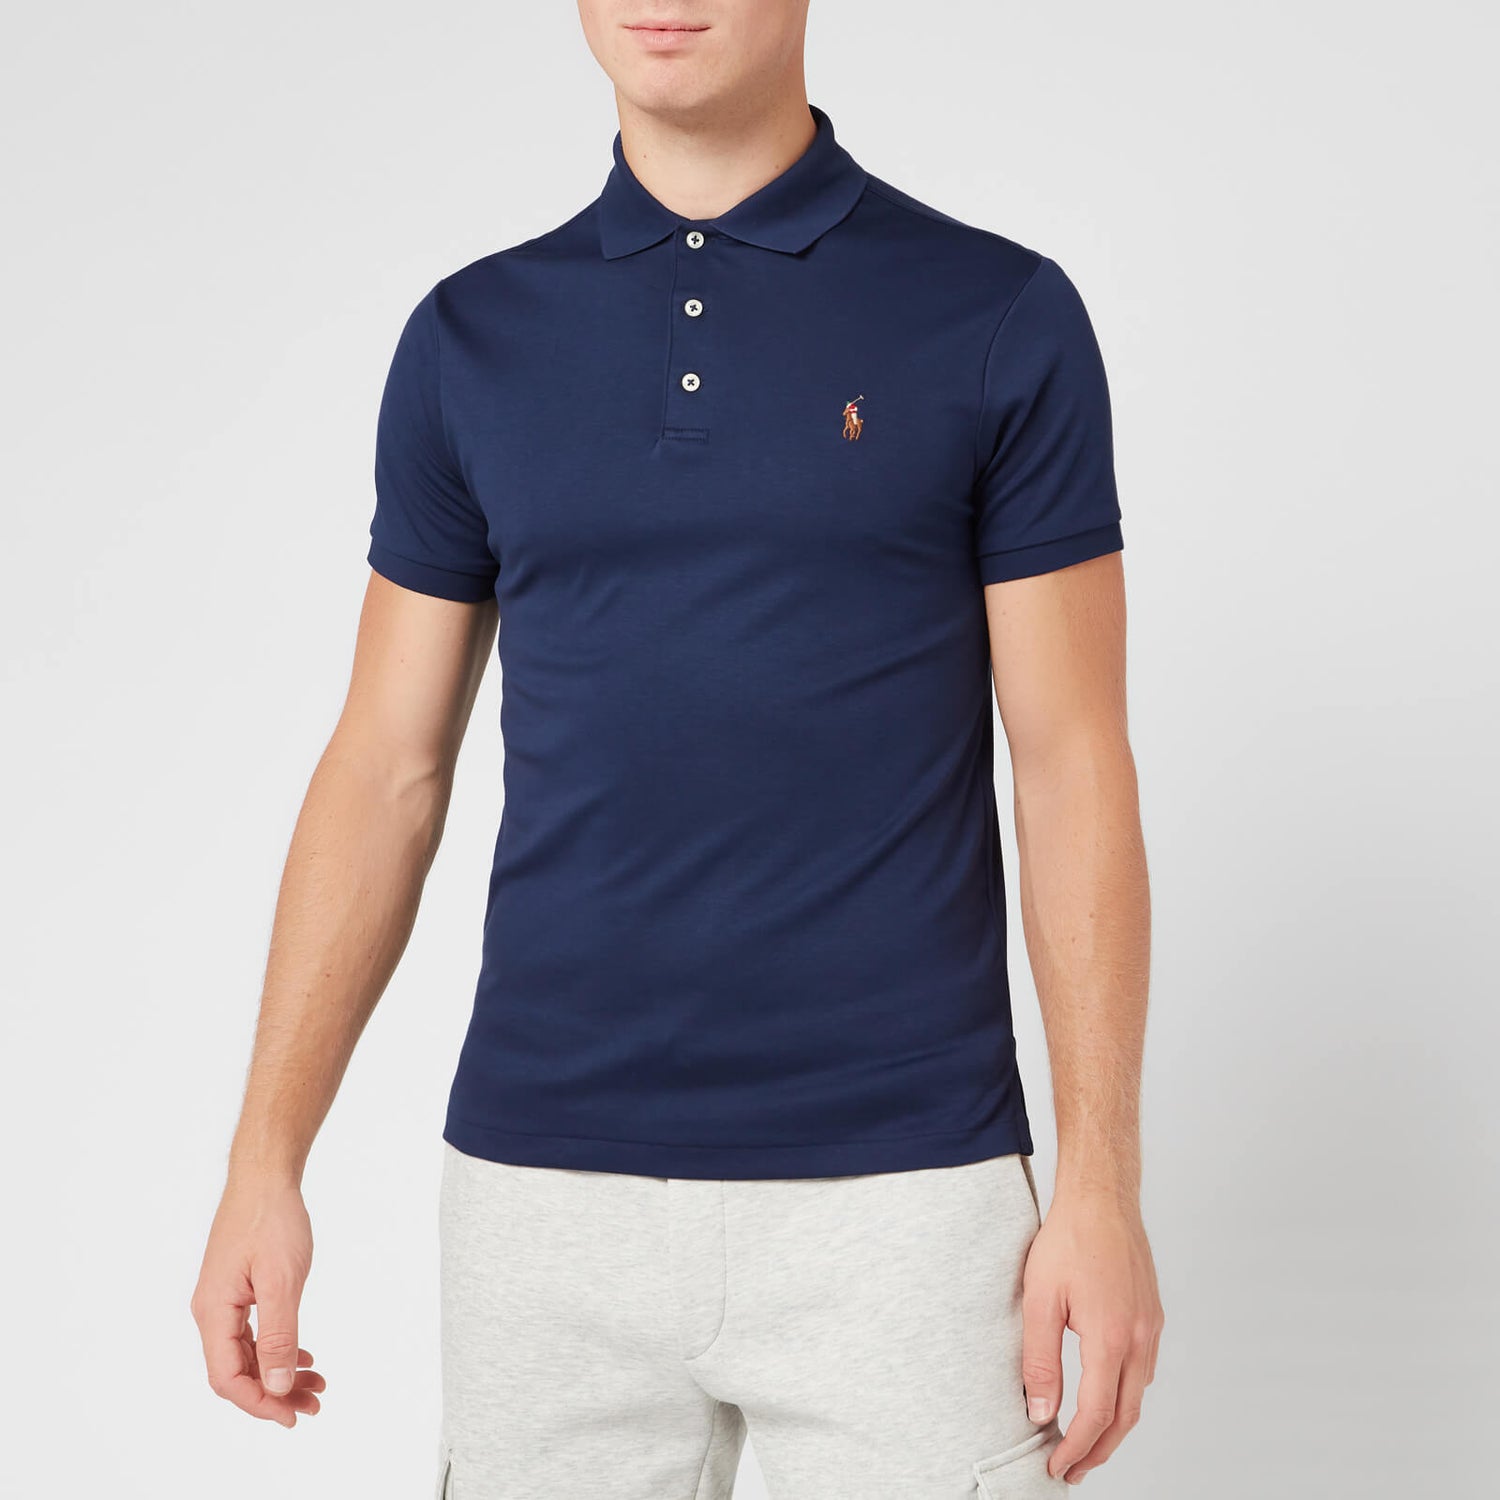 Polo Ralph Lauren Men's Slim Fit Soft Touch Polo Shirt - French Navy - S